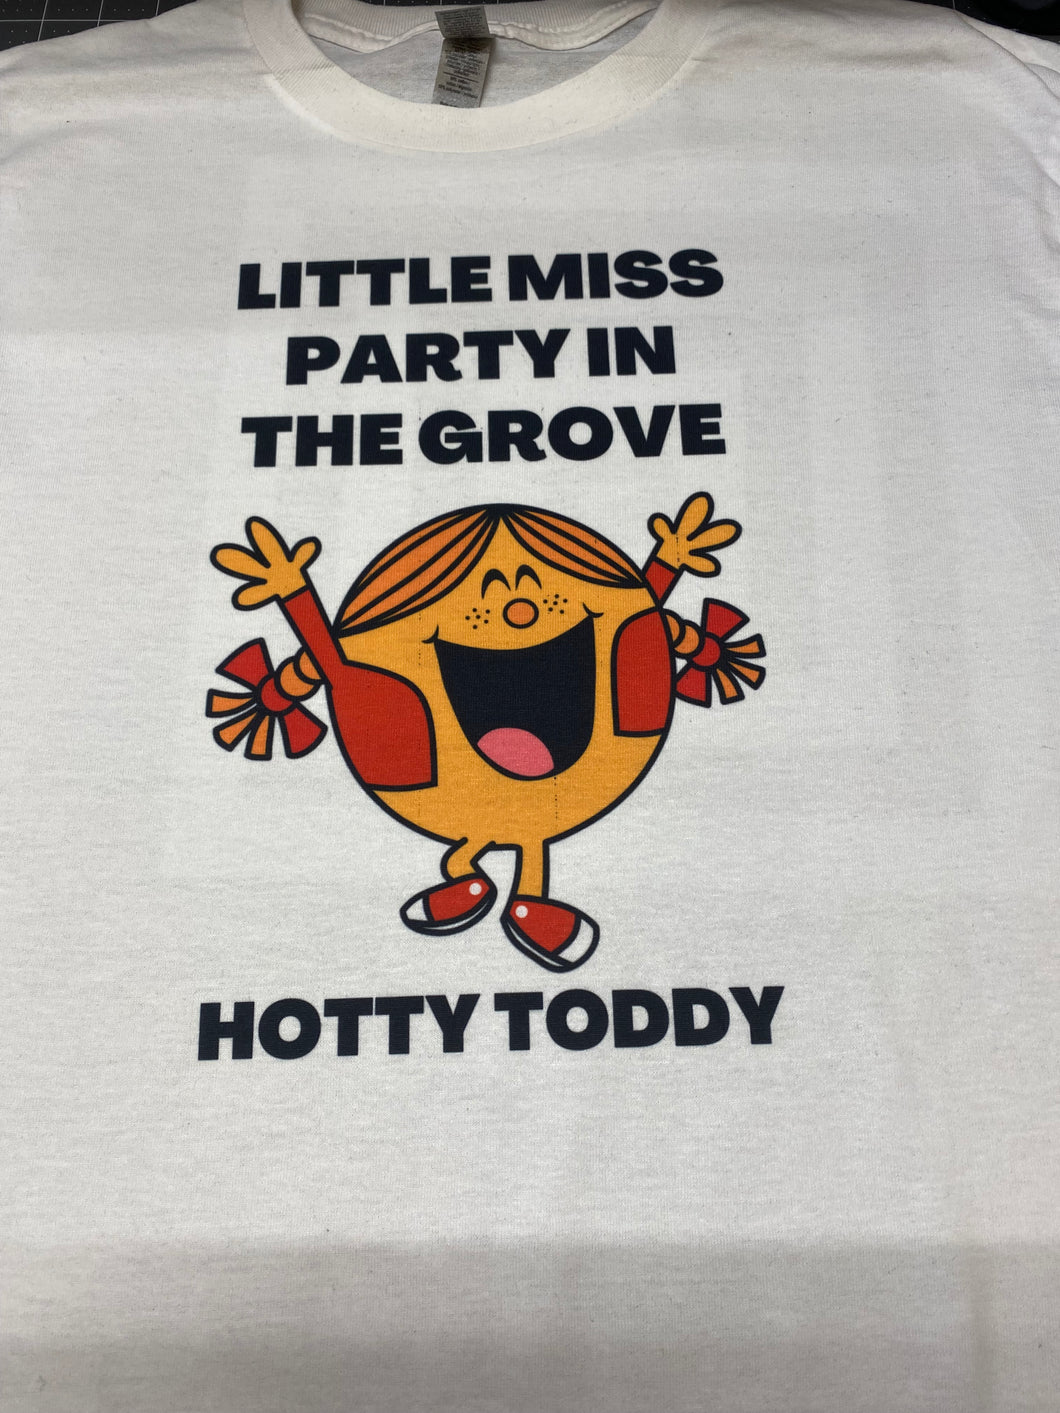 Little Miss Party in the Grove Shirt